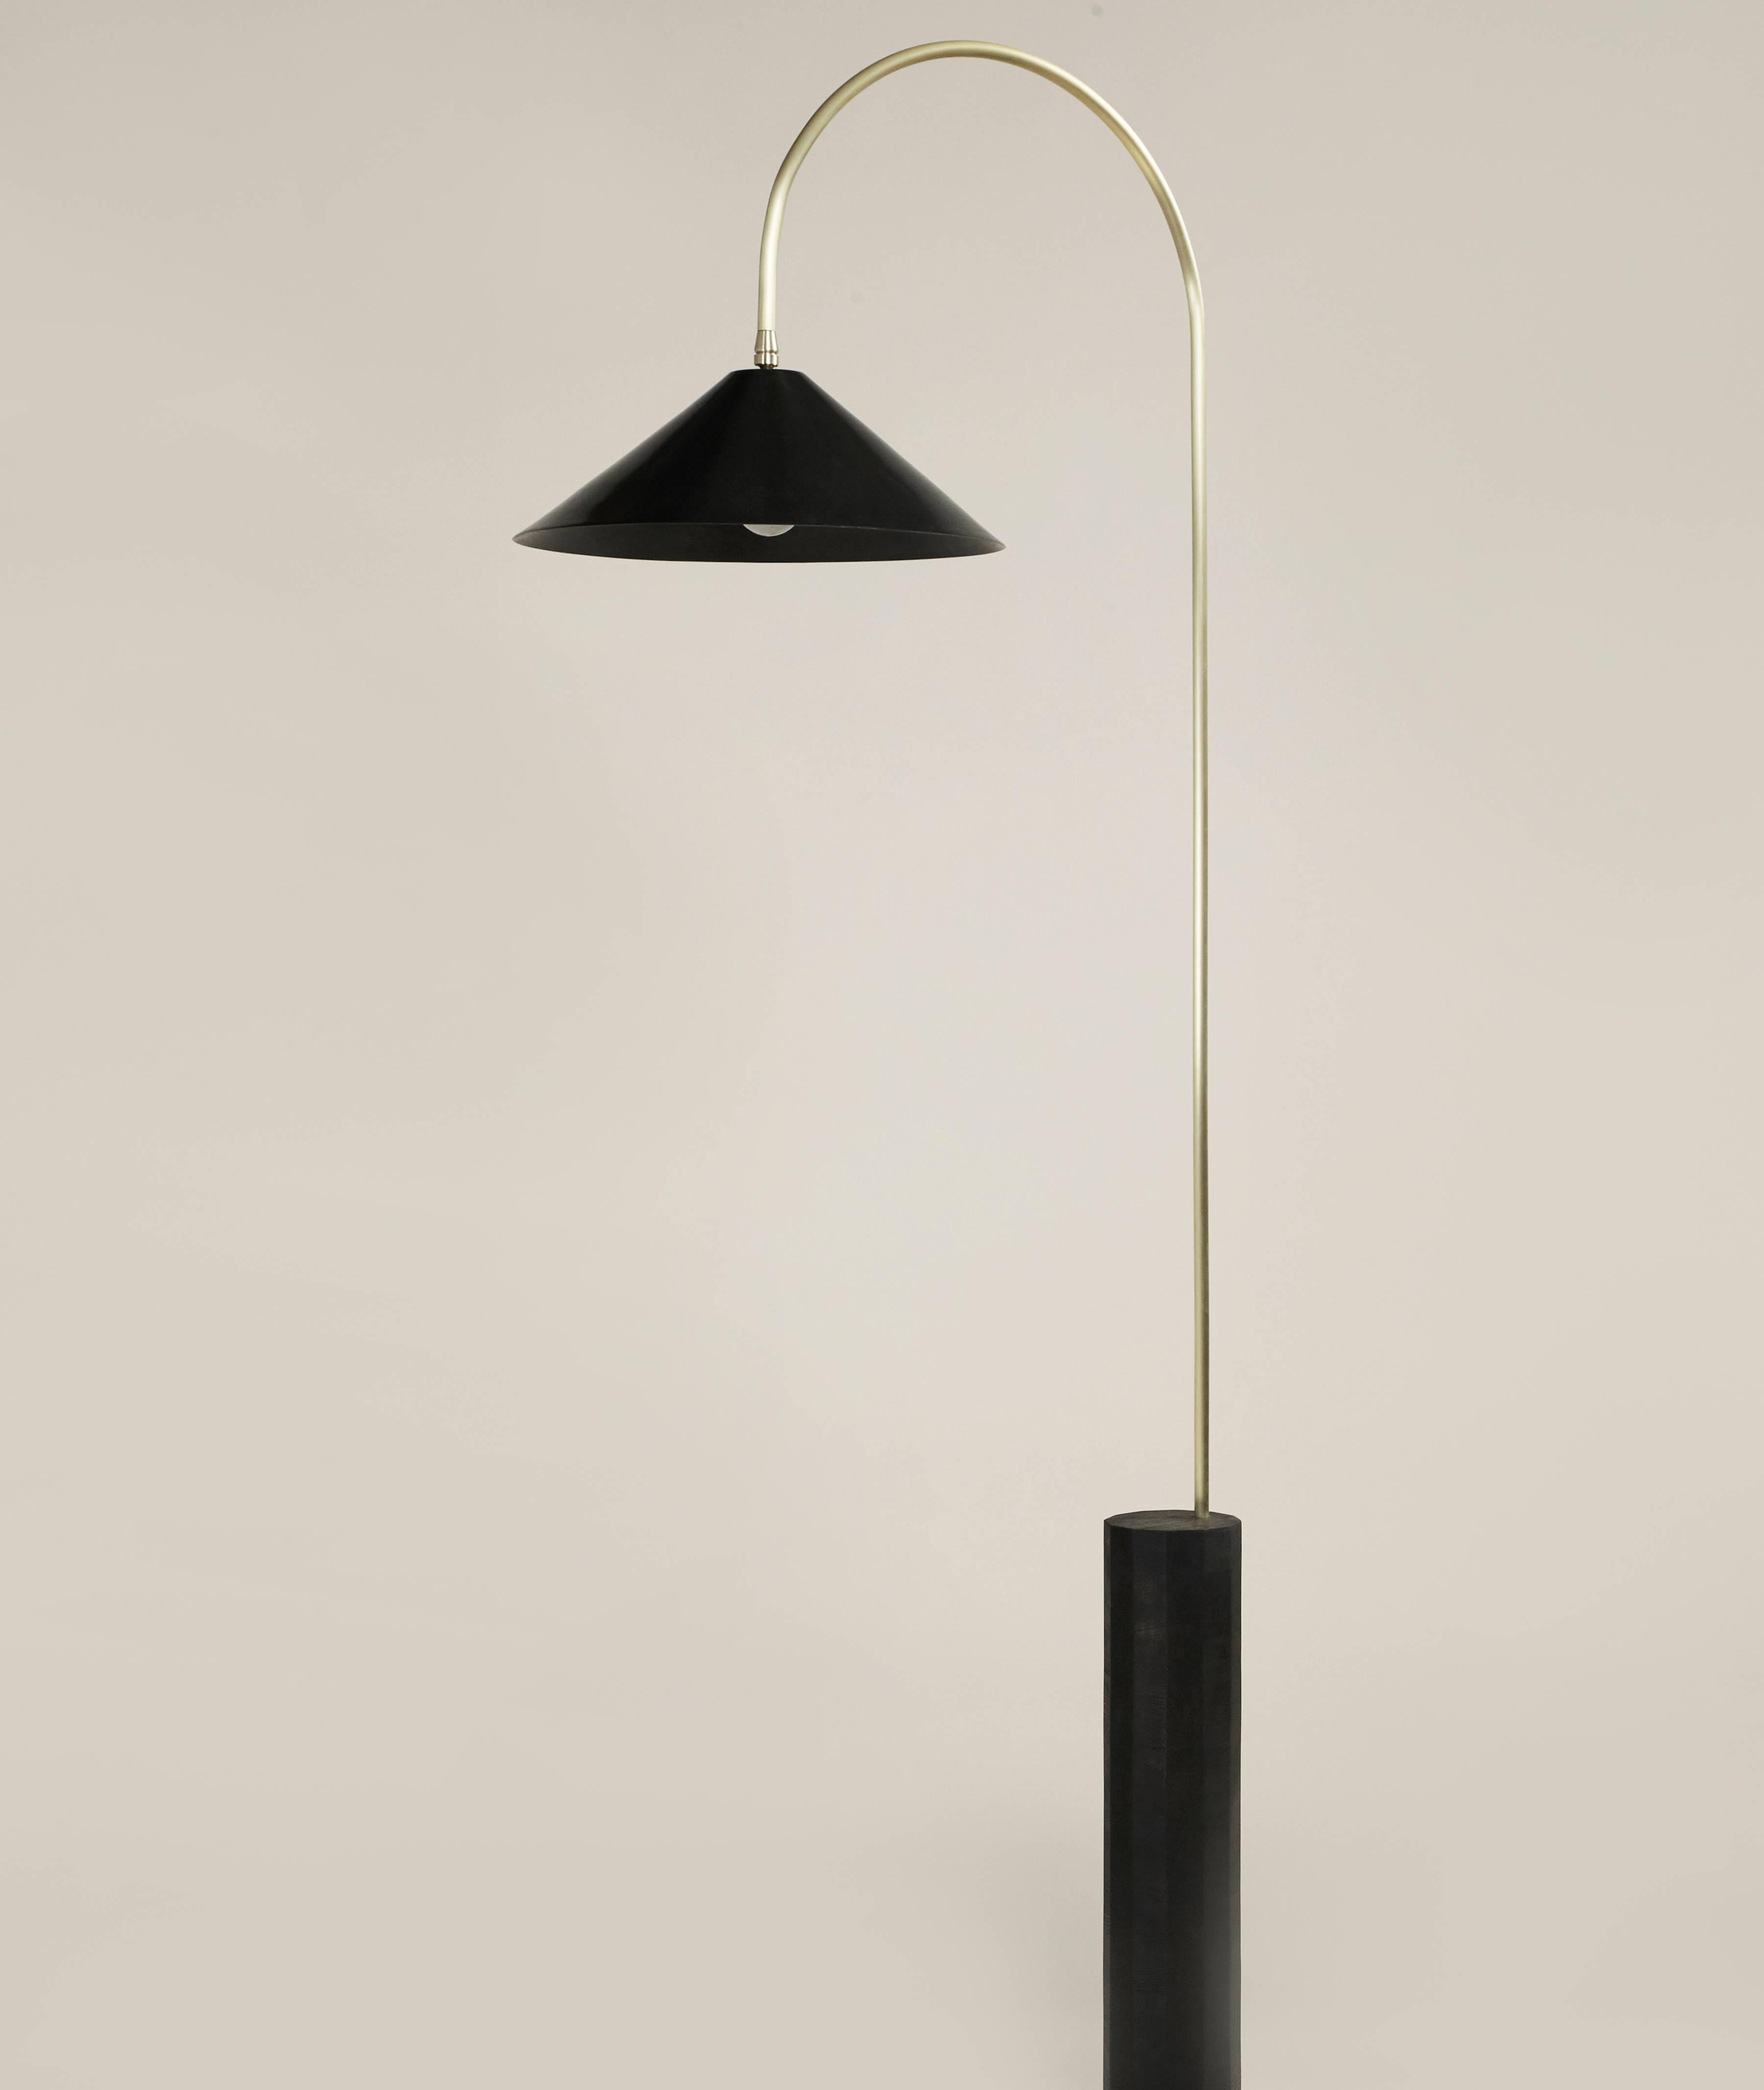 Inspired by the iconic Bishop’s hook cast-iron street lamps that illuminate New York City’s Williamsburg Bridge, this elegant tall floor lamp is comprised of a blackened-steel hand-spun shade, brushed-brass curved neck and ebony-stained ashwood